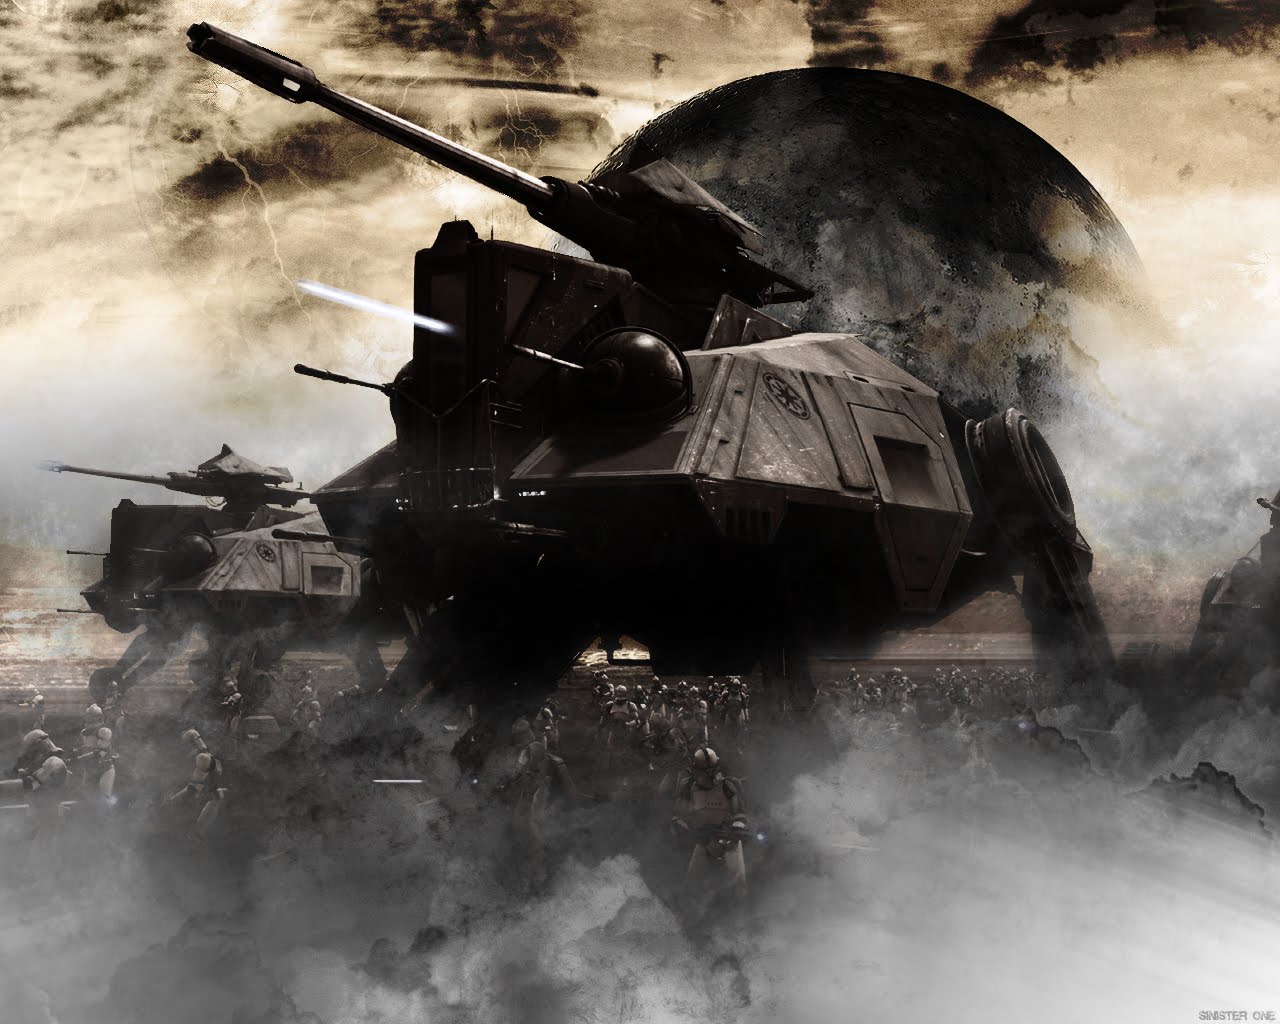 star wars cool wallpaper,combat vehicle,tank,vehicle,strategy video game,illustration